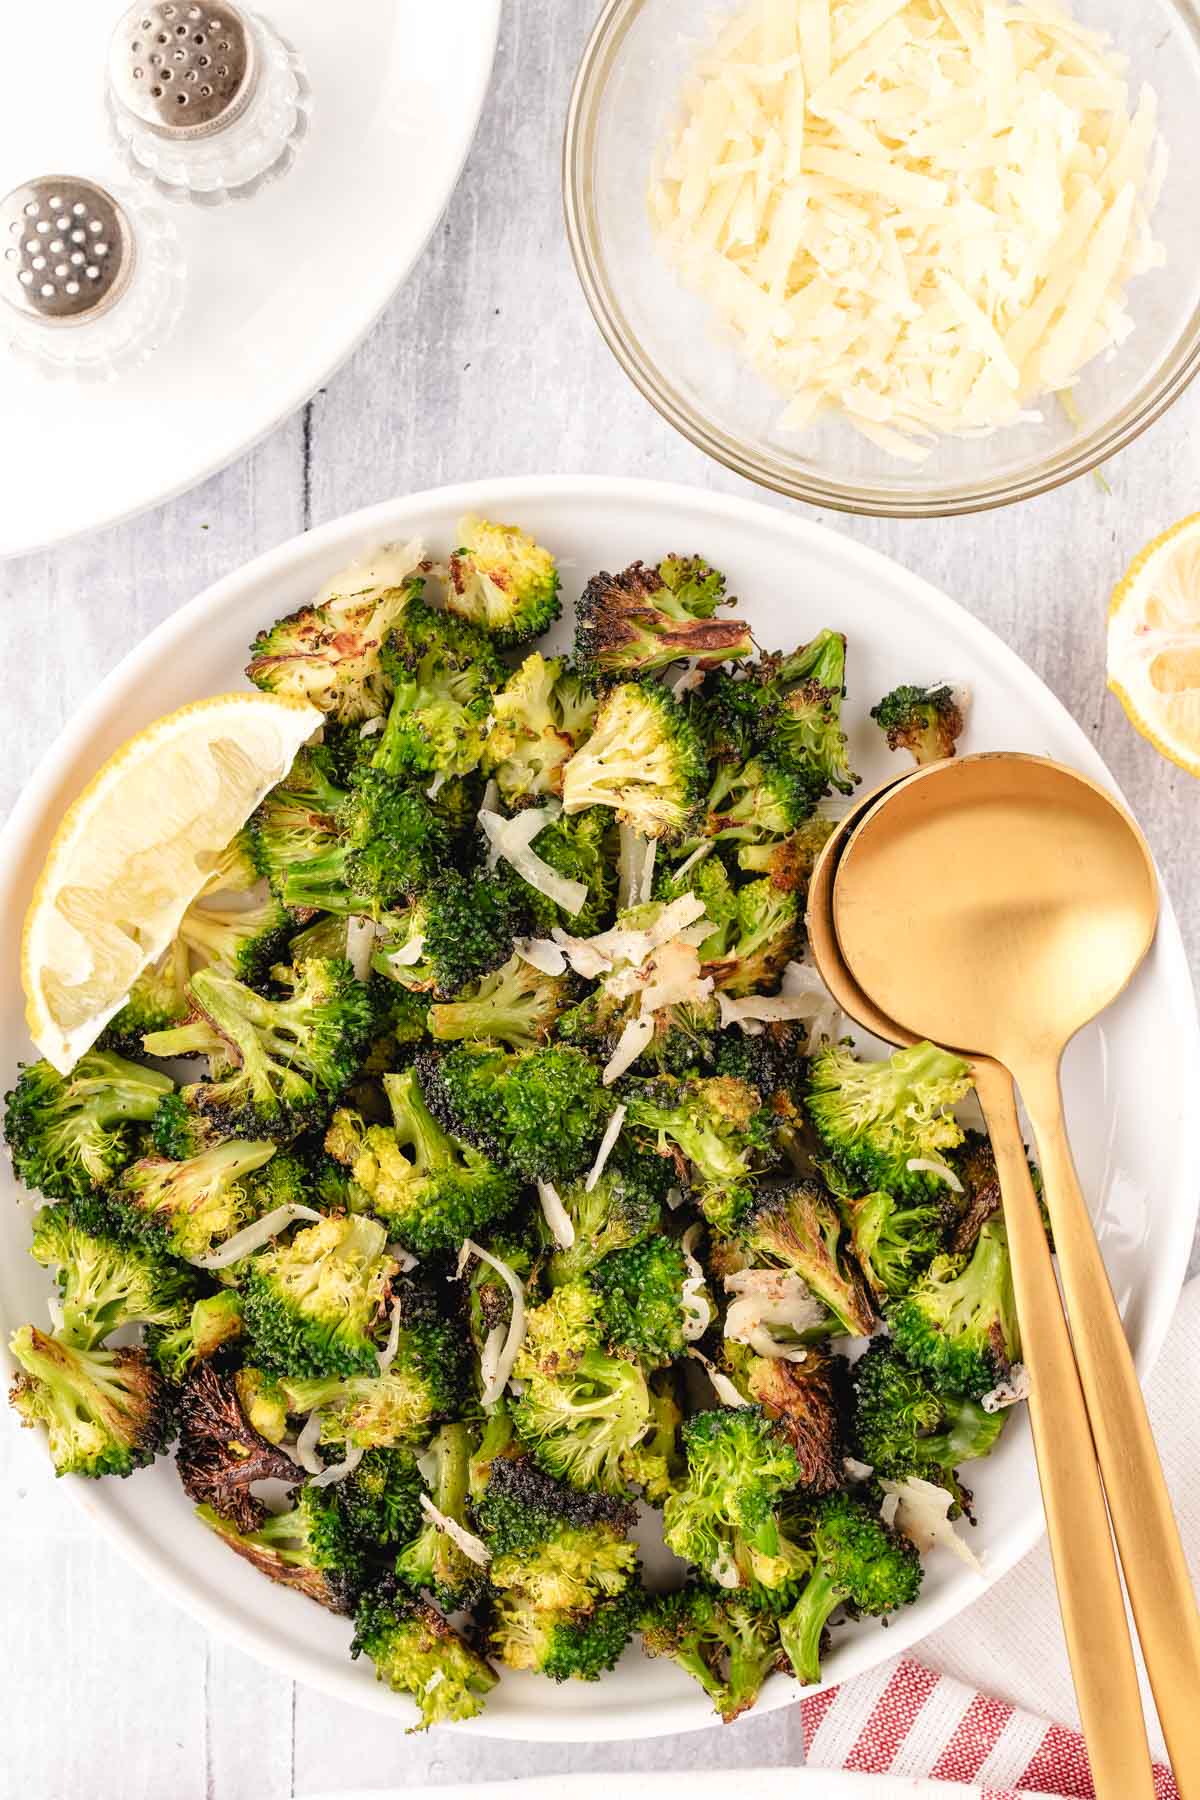 A serving bowl of broccoli that has been roasted until golden brown with parmesan cheese and served with a wedge of lemon.